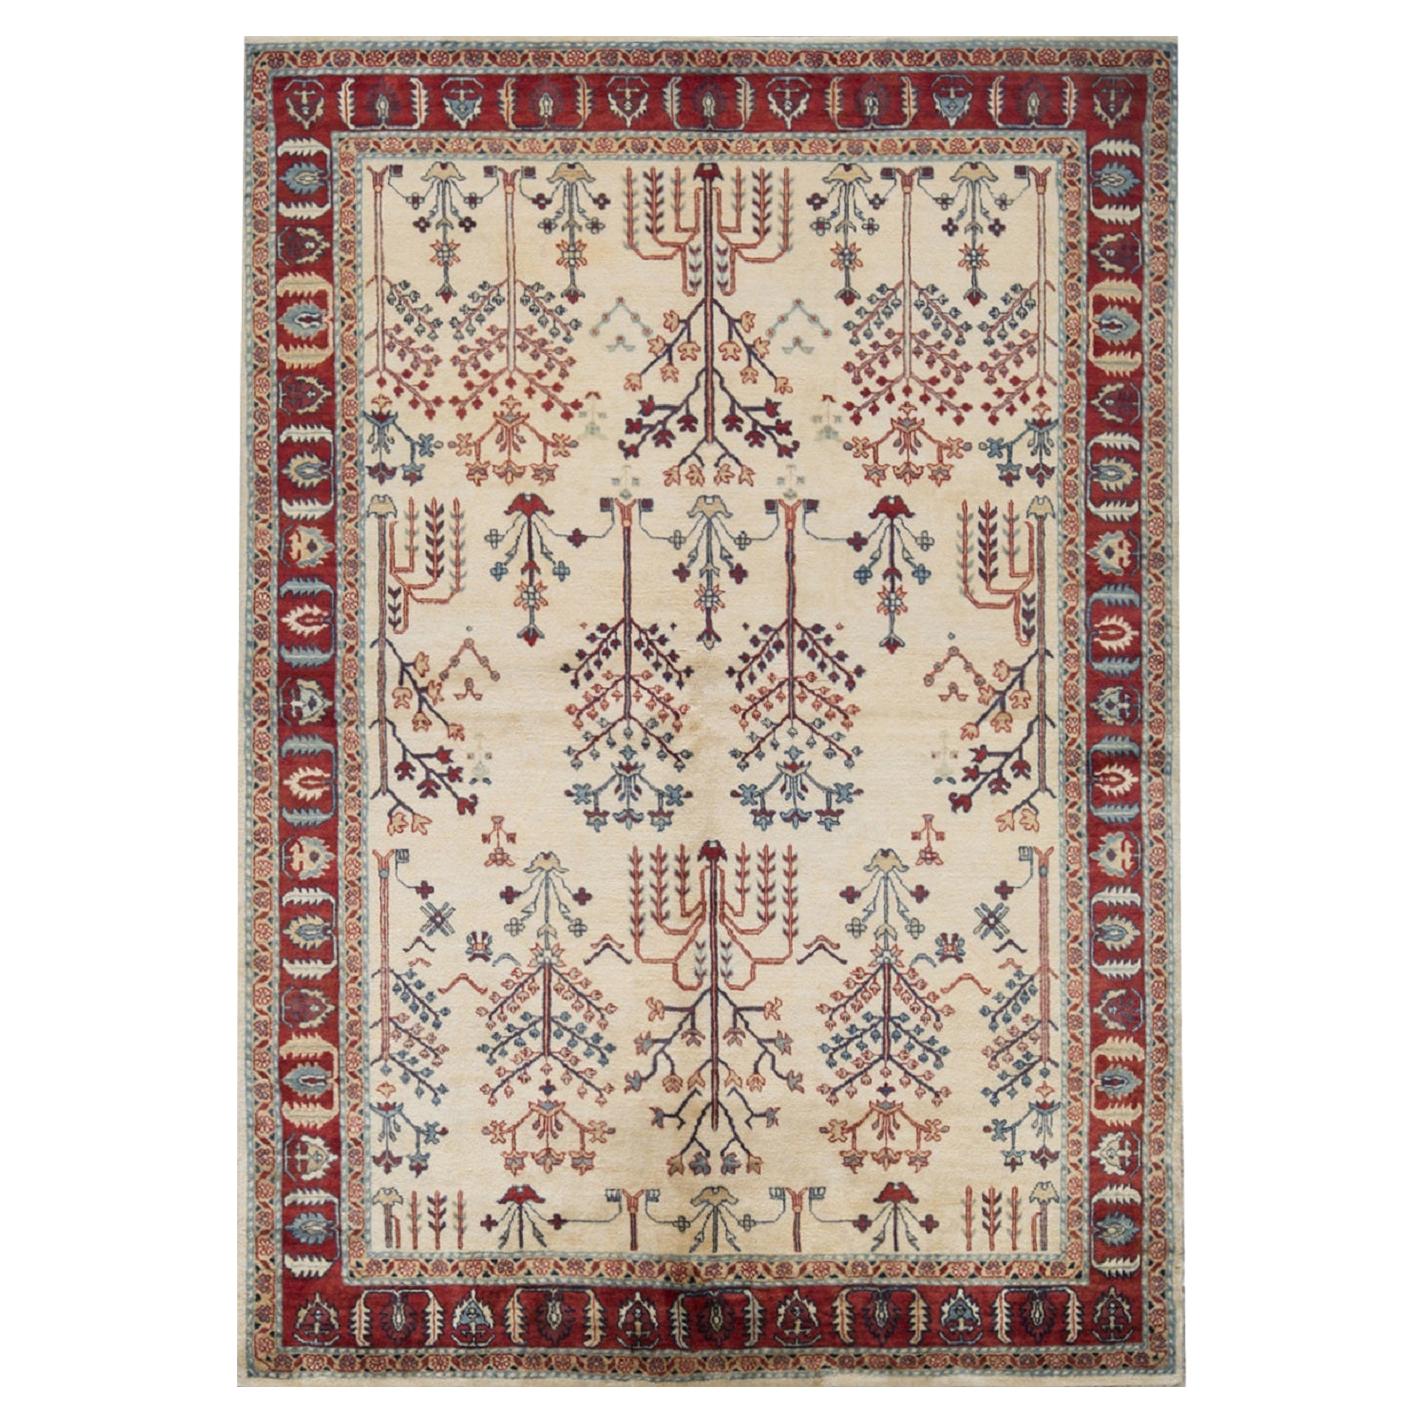 One of a Kind Contemporary Handwoven Wool Area Rug 5'7 x 7'10